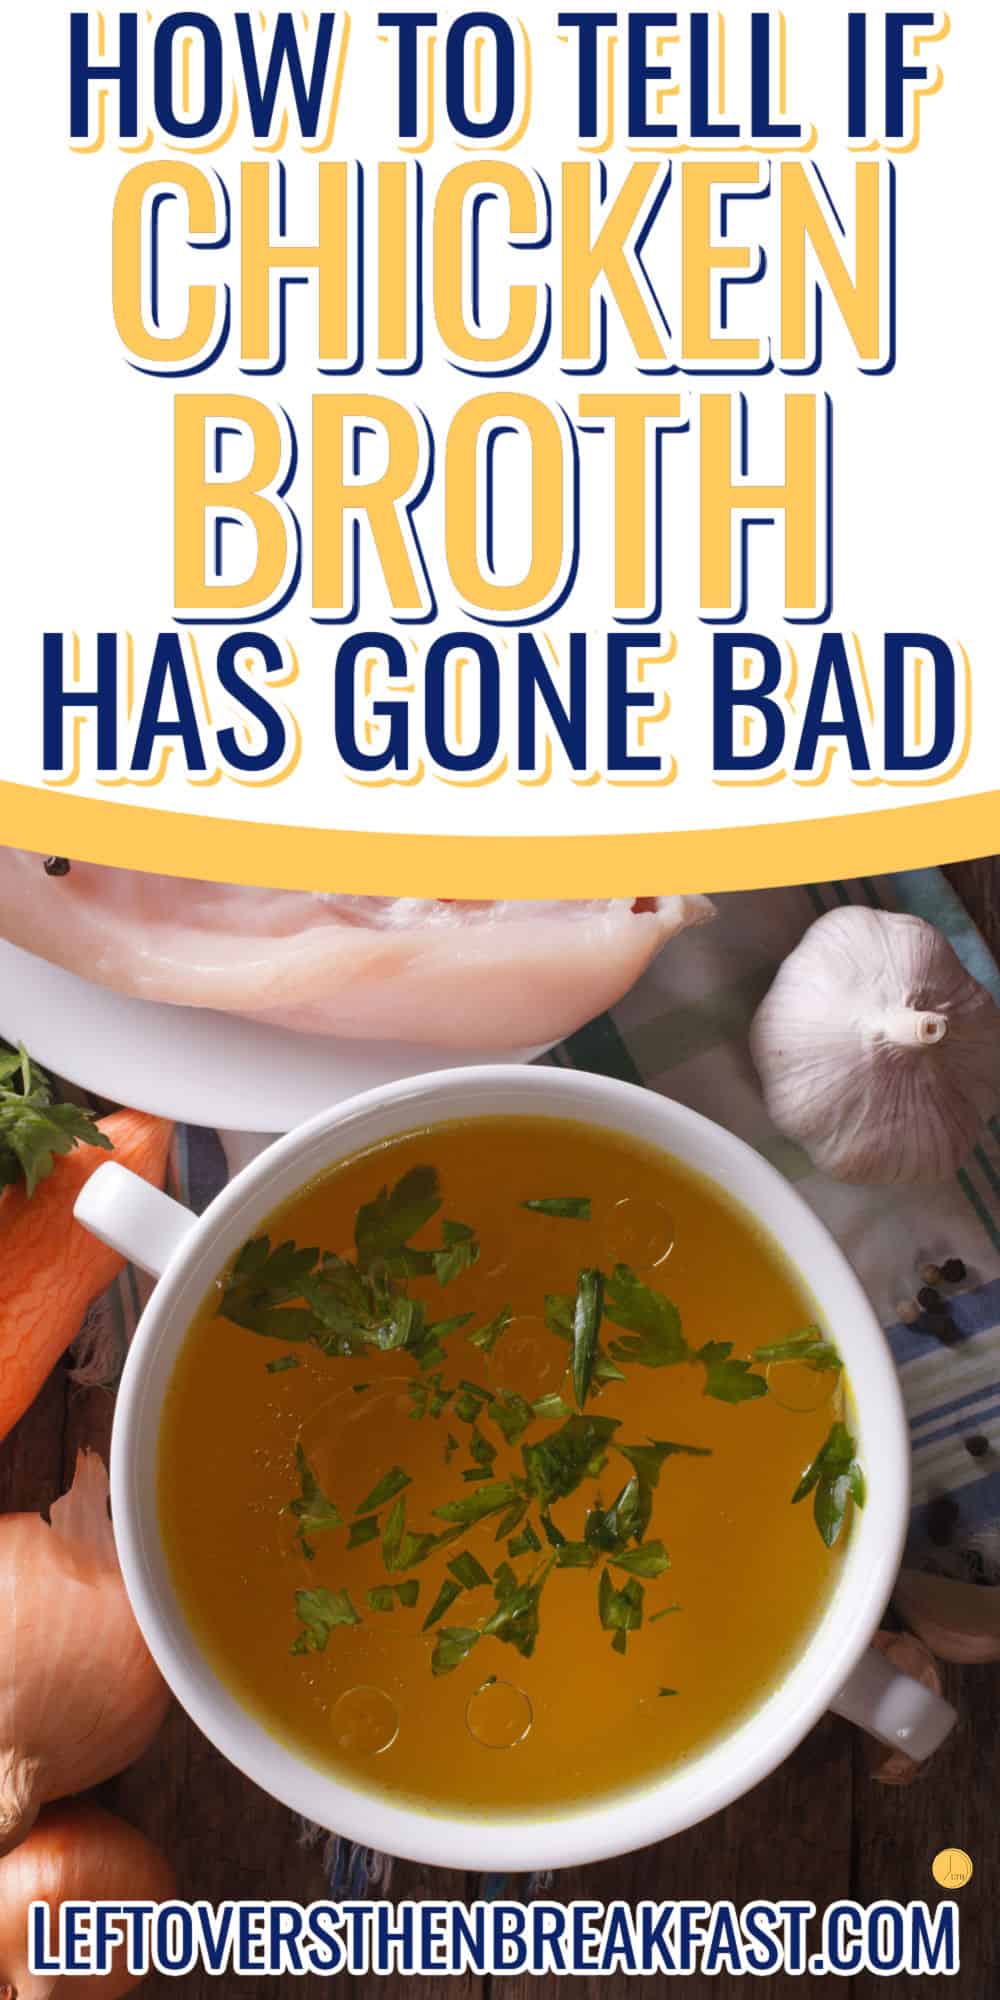 broth with text "how to tell if chicken broth has gone bad"